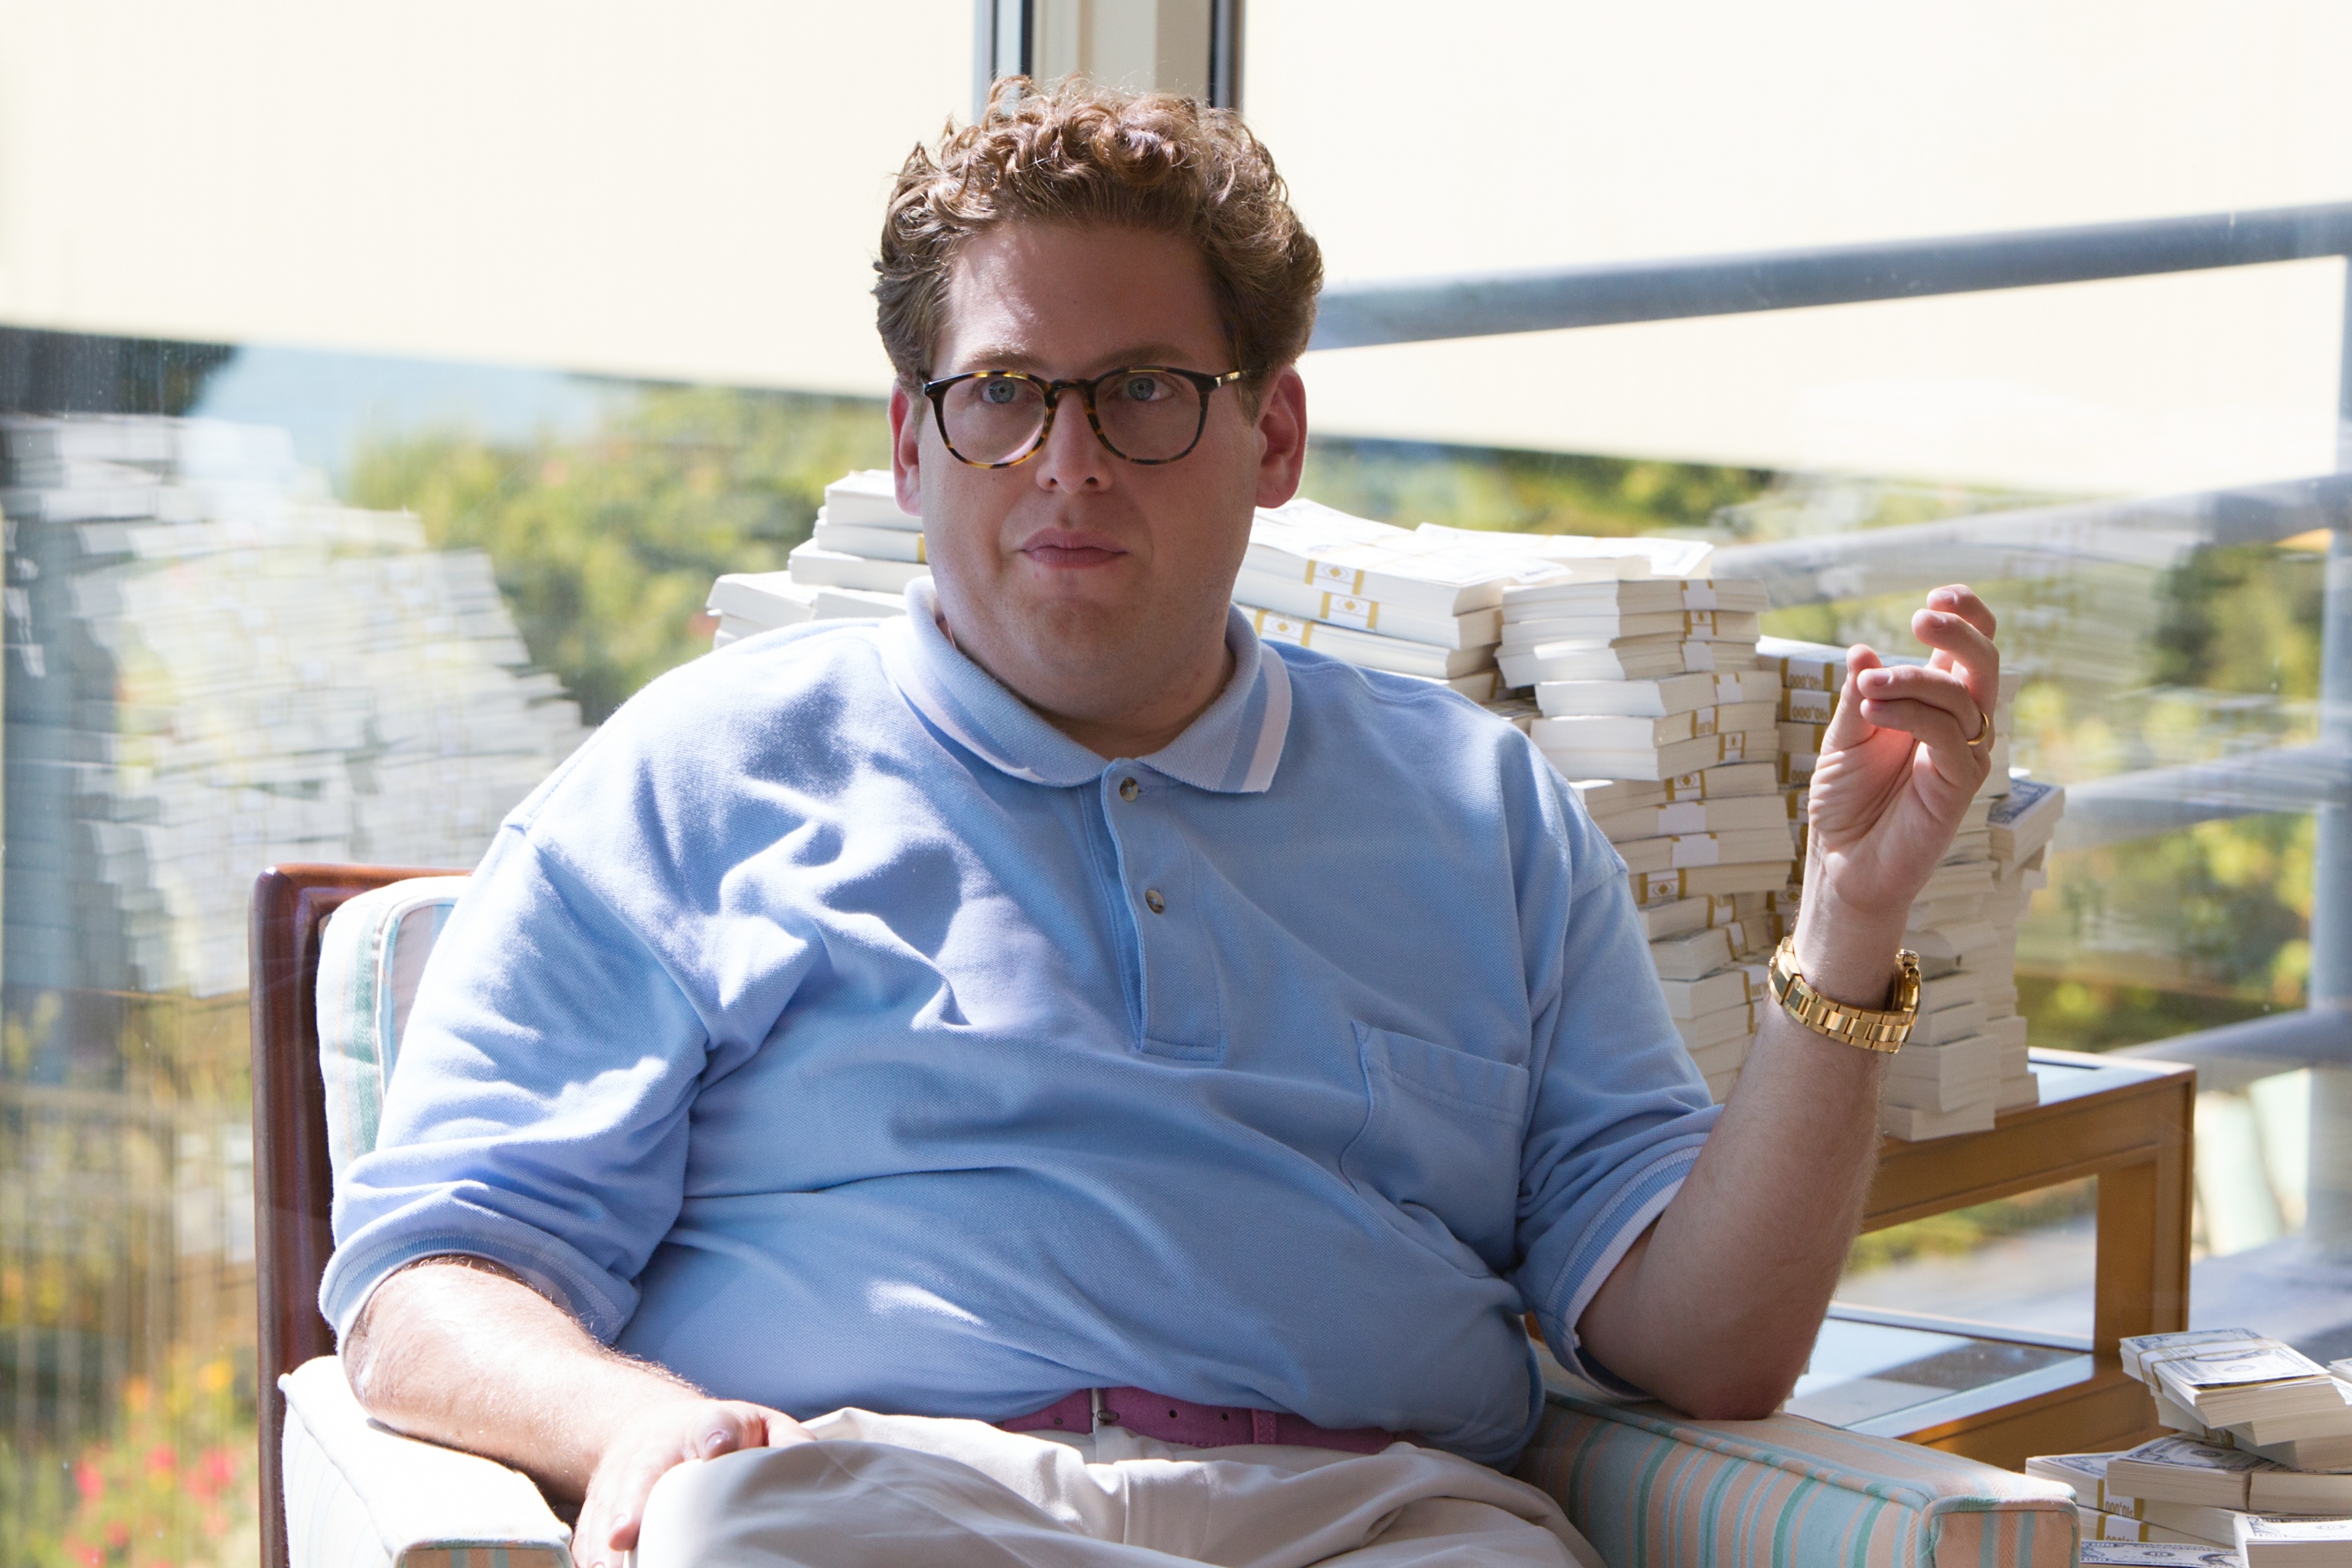 The Wolf of Wall Street: Jonah Hill as Donnie Azoff, An American businessman and former stockbroker. 3080x2050 HD Background.